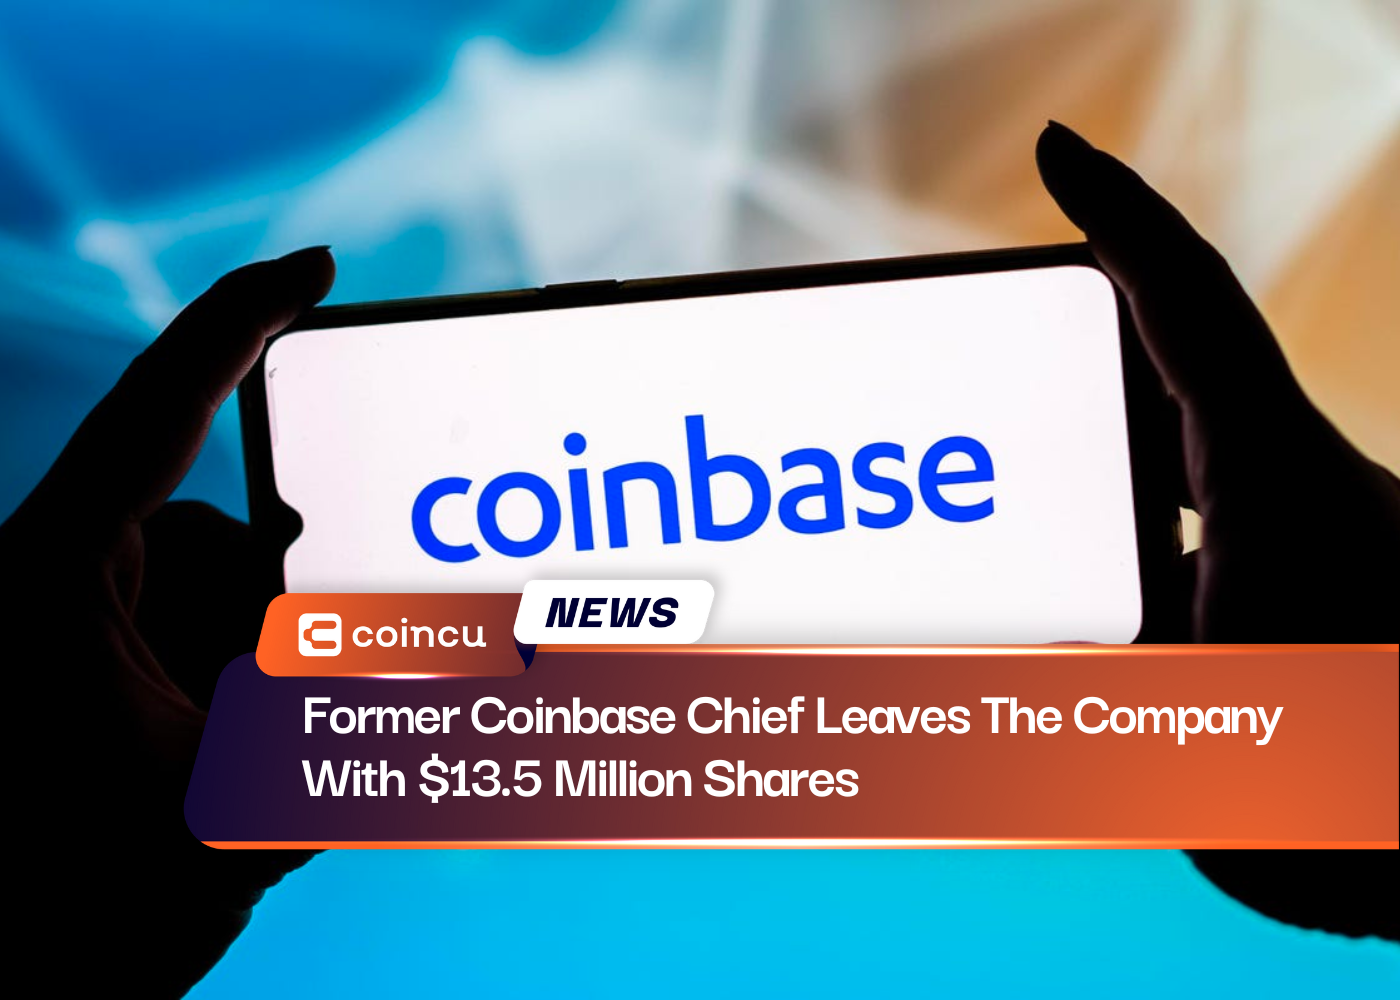 Former Coinbase Chief Leaves The Company With $13.5 Million Shares